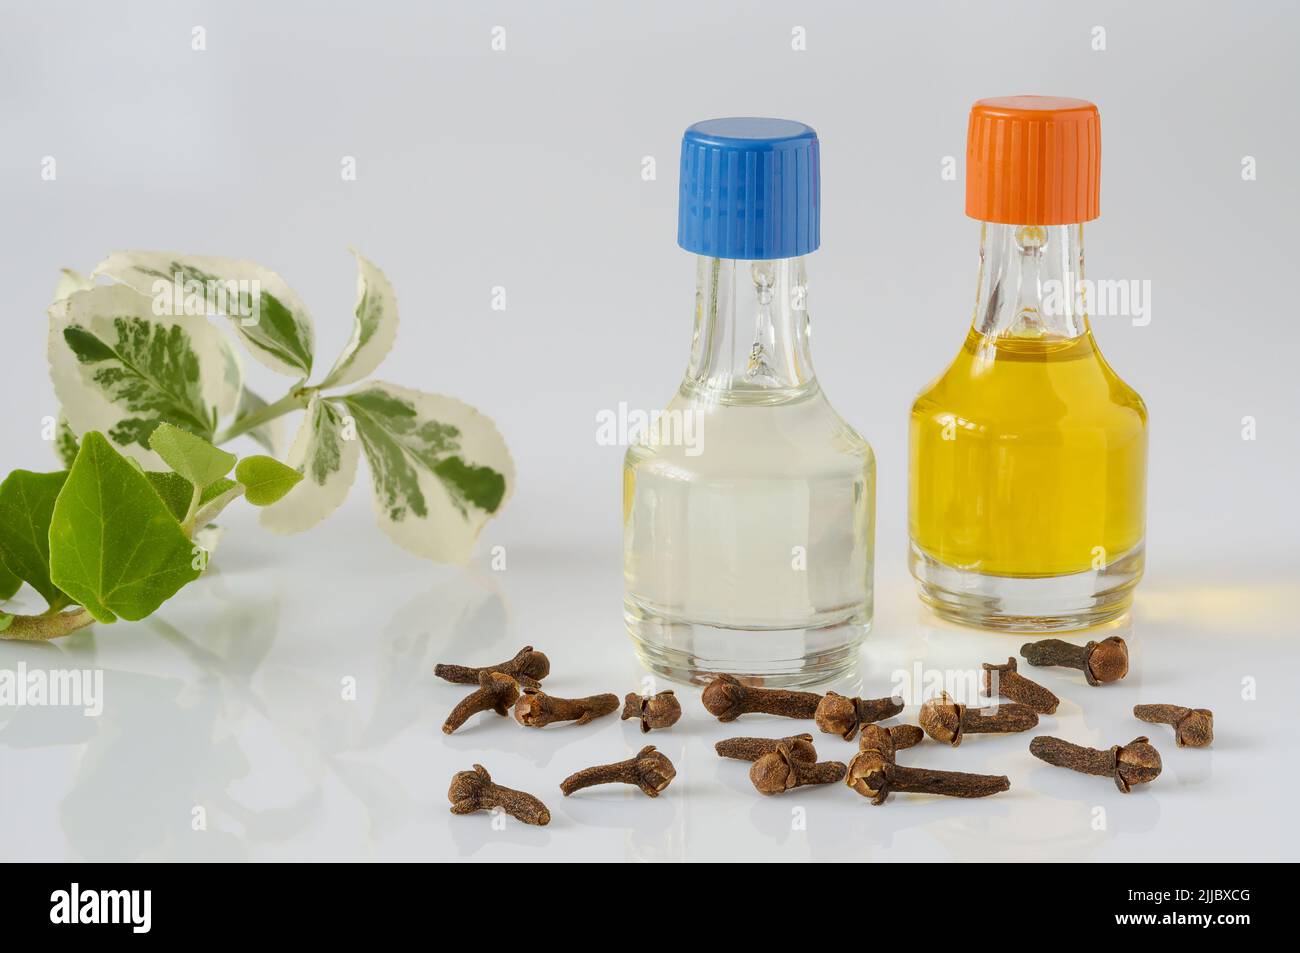 Clove and lavender oil. Pebbles and cloves, isolated, essential oils in bottles, zen background concept, spa Stock Photo